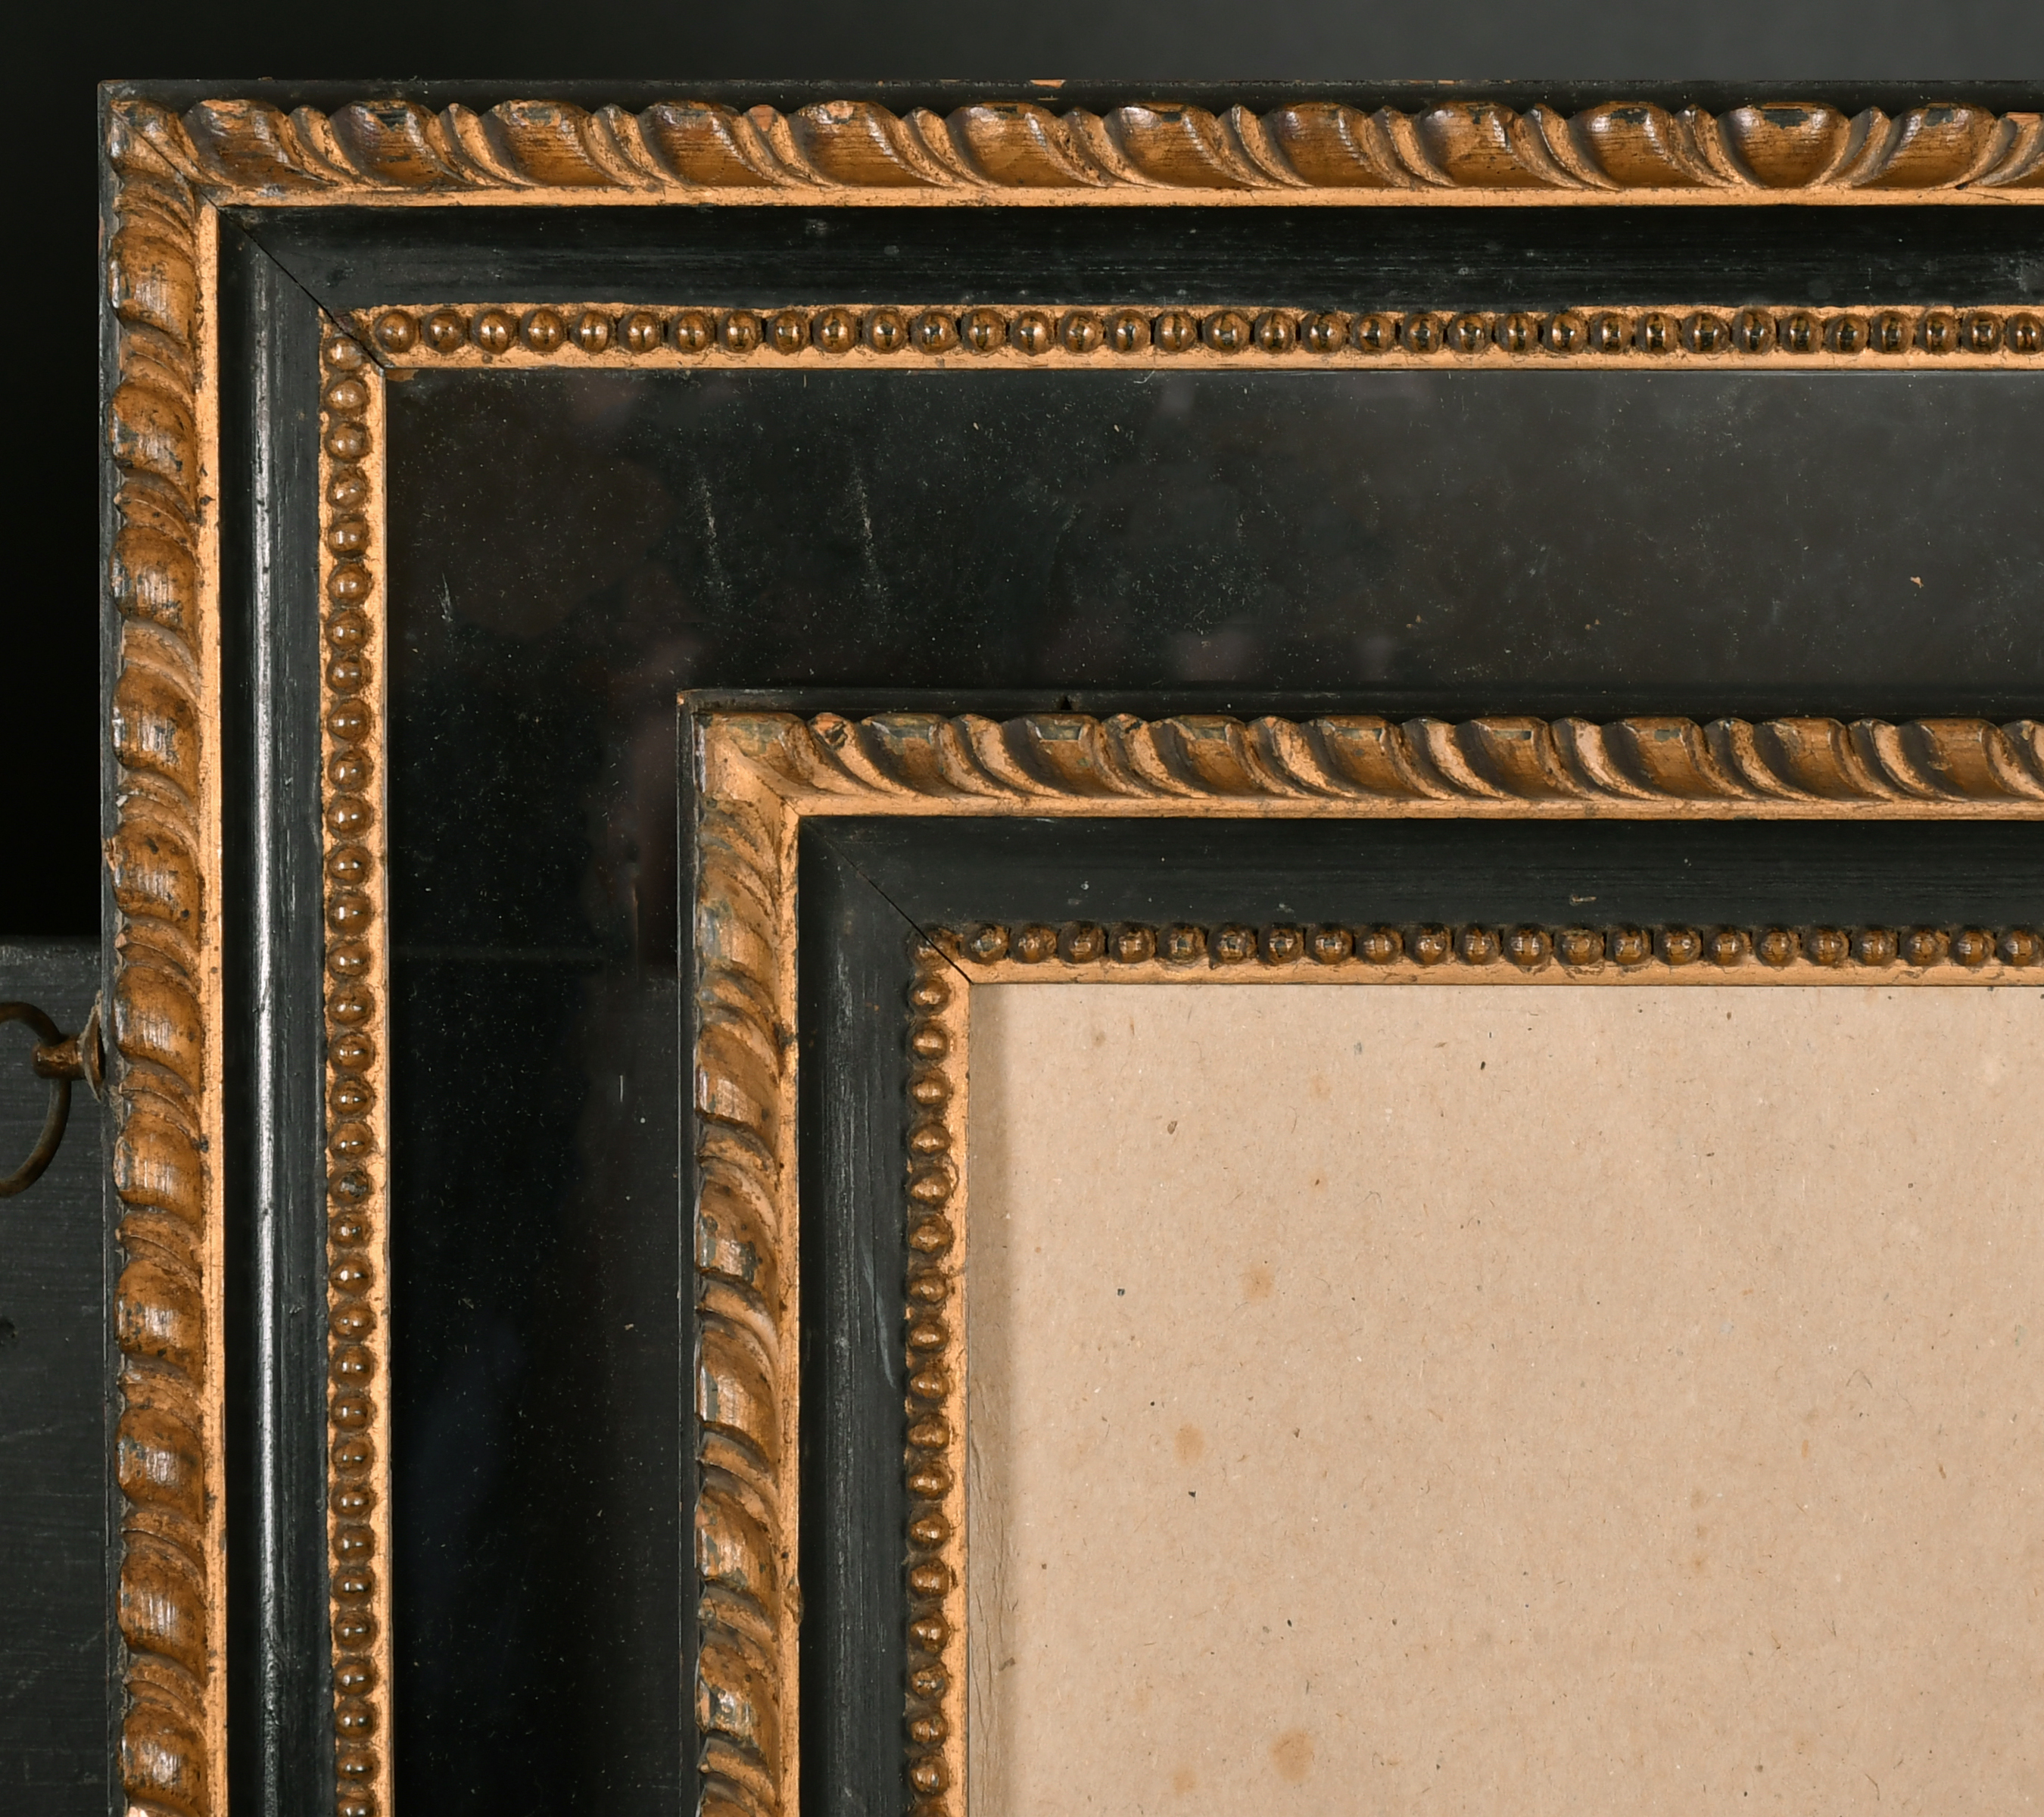 Early 19th Century English School. A Pair of Carved Wood Frames, with a black inner and outer